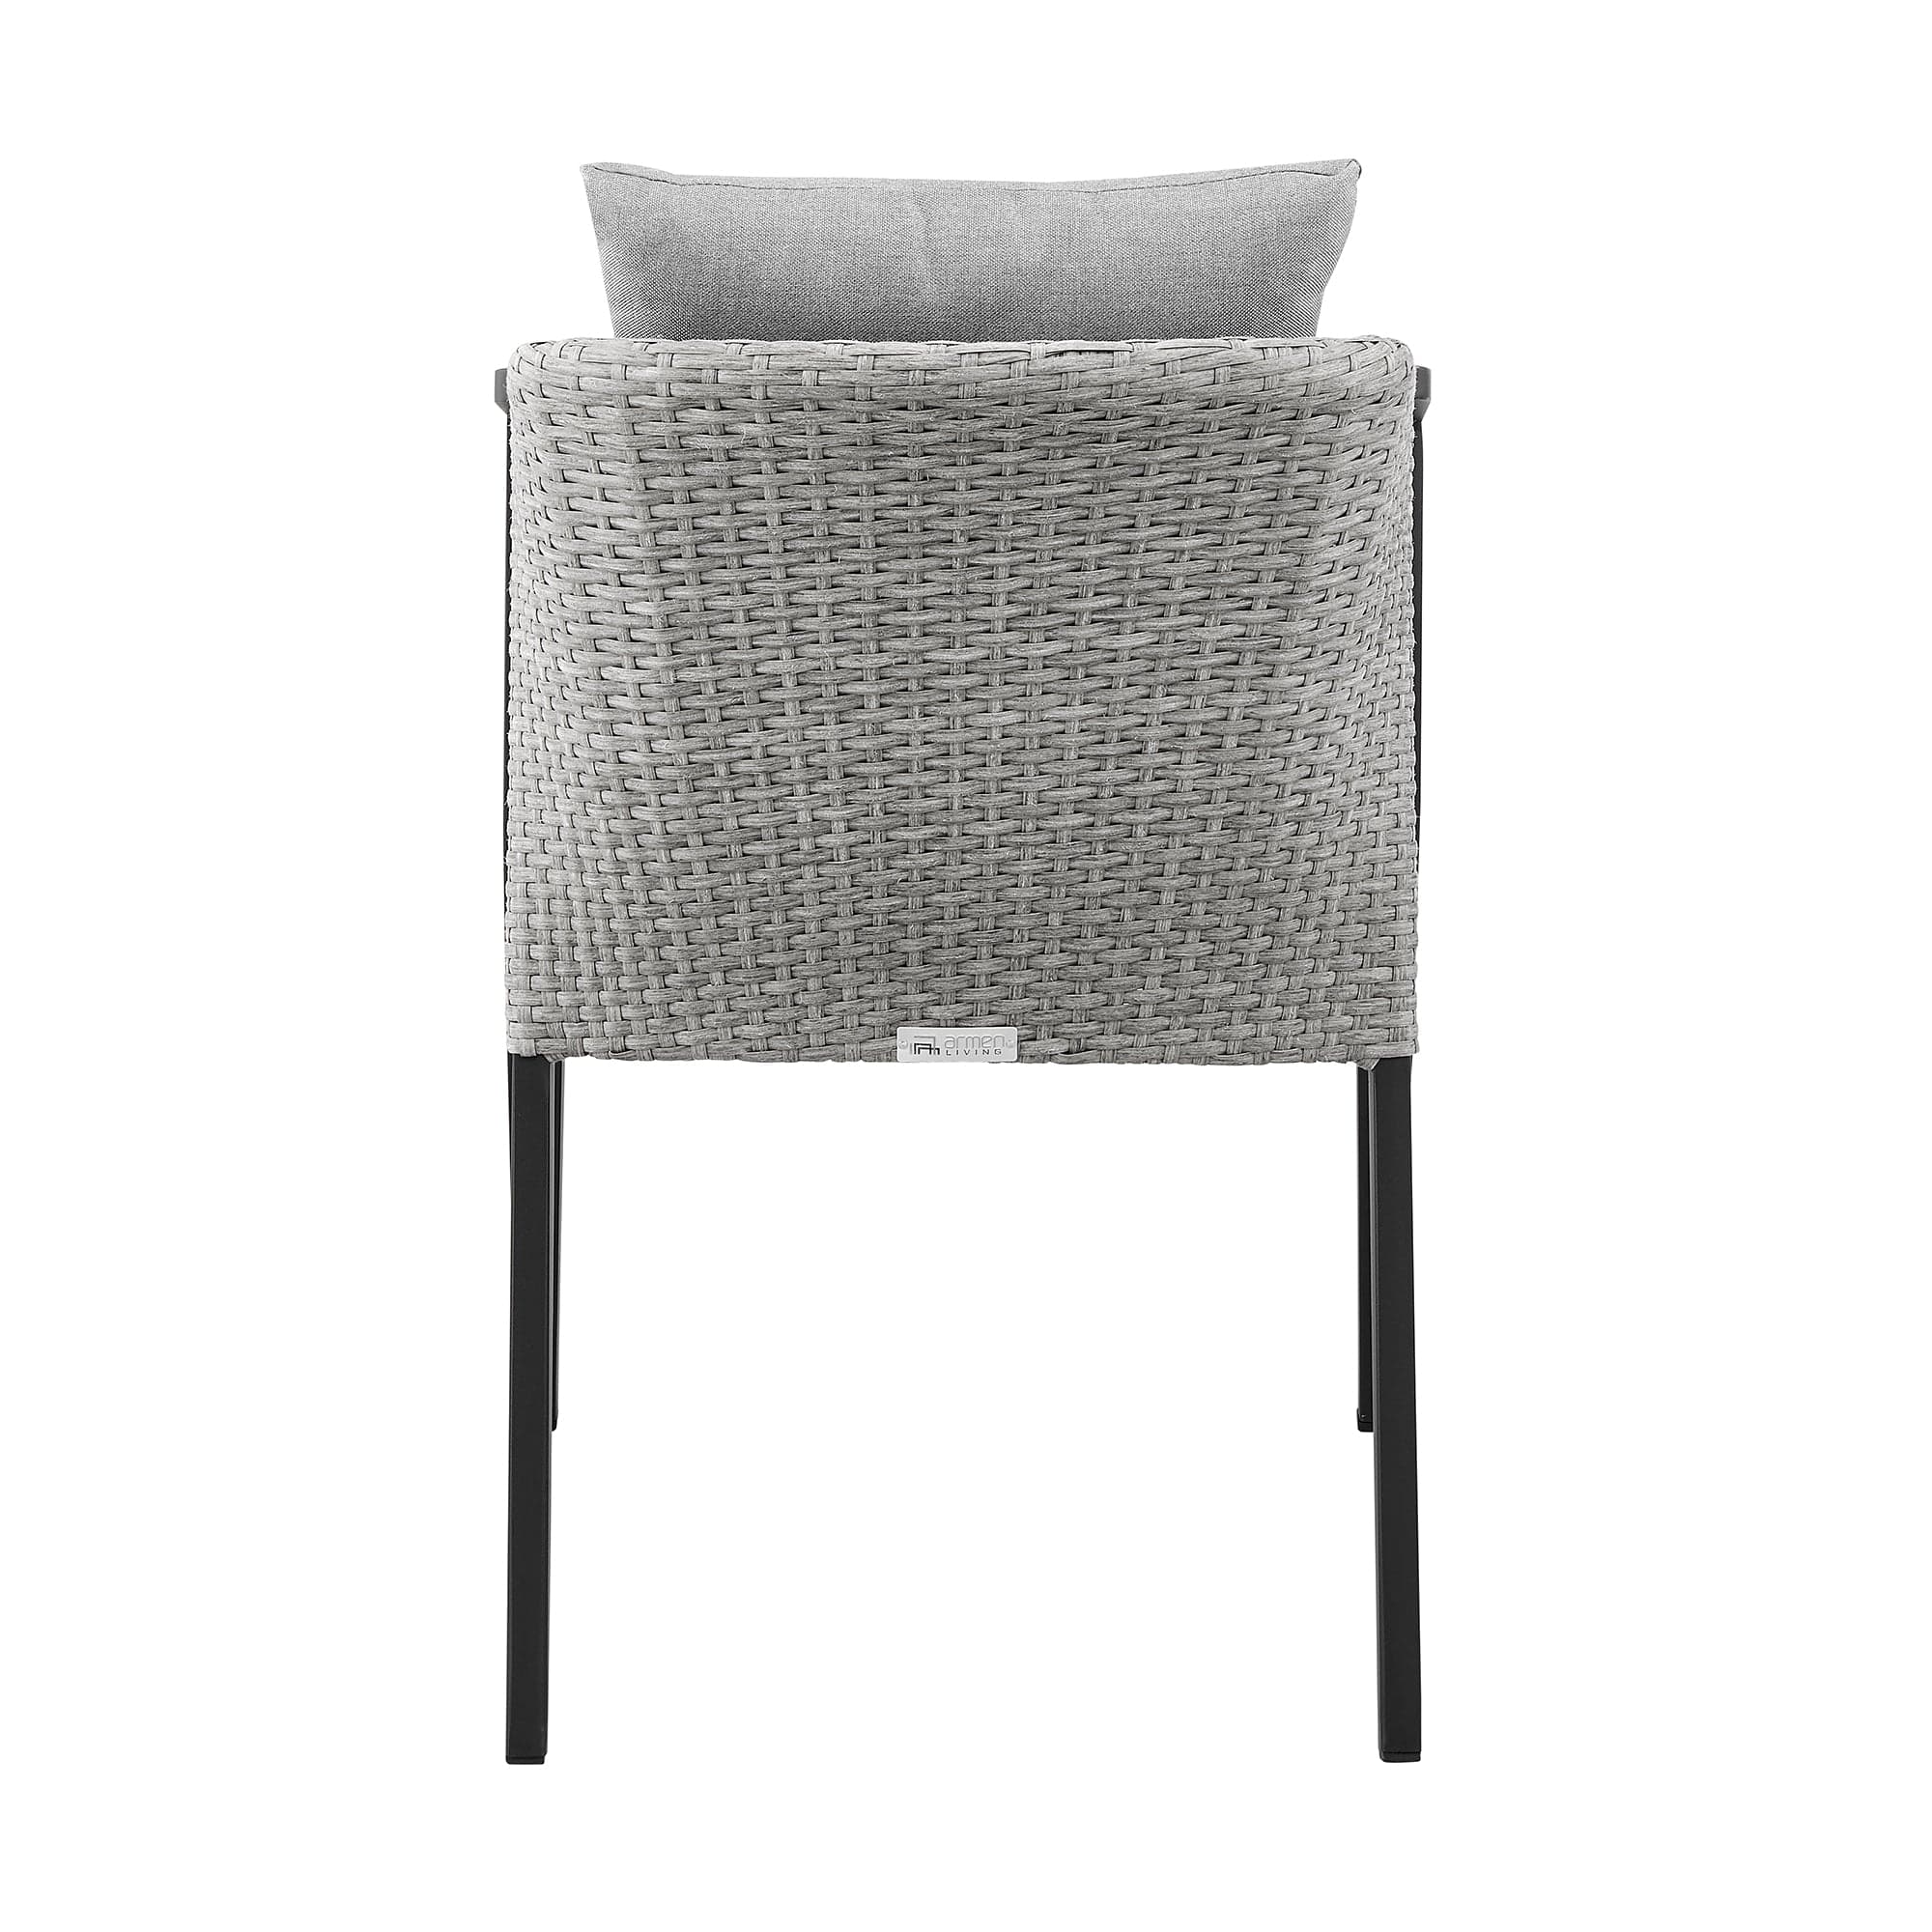 Armen Living Outdoor Dining Chair Armen Living | Palma Outdoor Patio Dining Chairs in Aluminum and Wicker with Grey Cushions - Set of 2 | LCPFSIGR